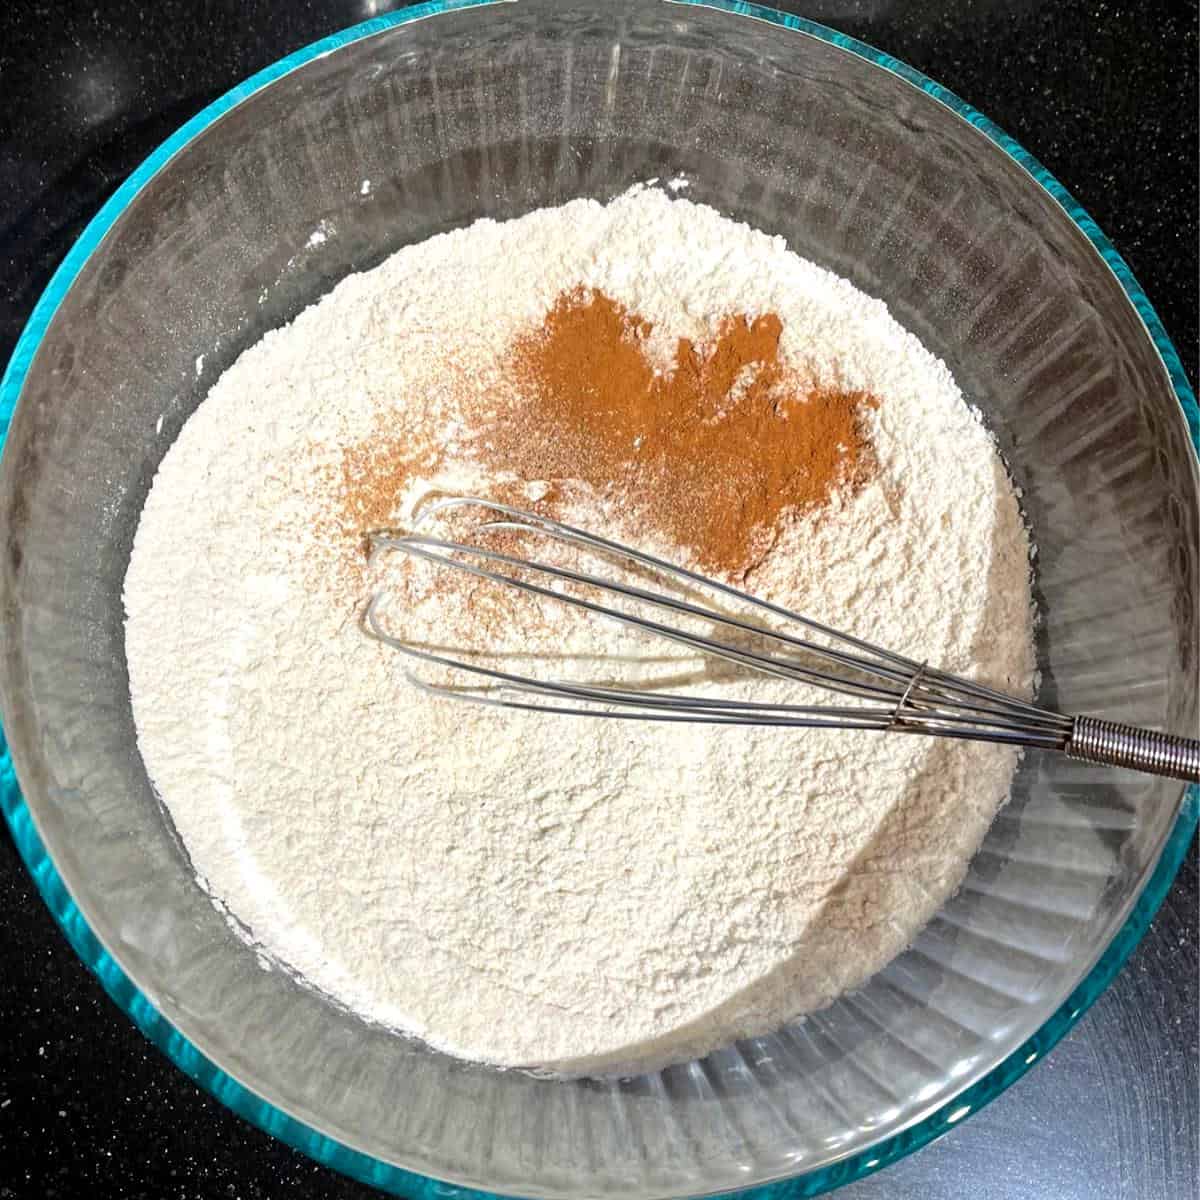 Cinnamon added to flour and baking soda and baking powder in bowl with whisk.